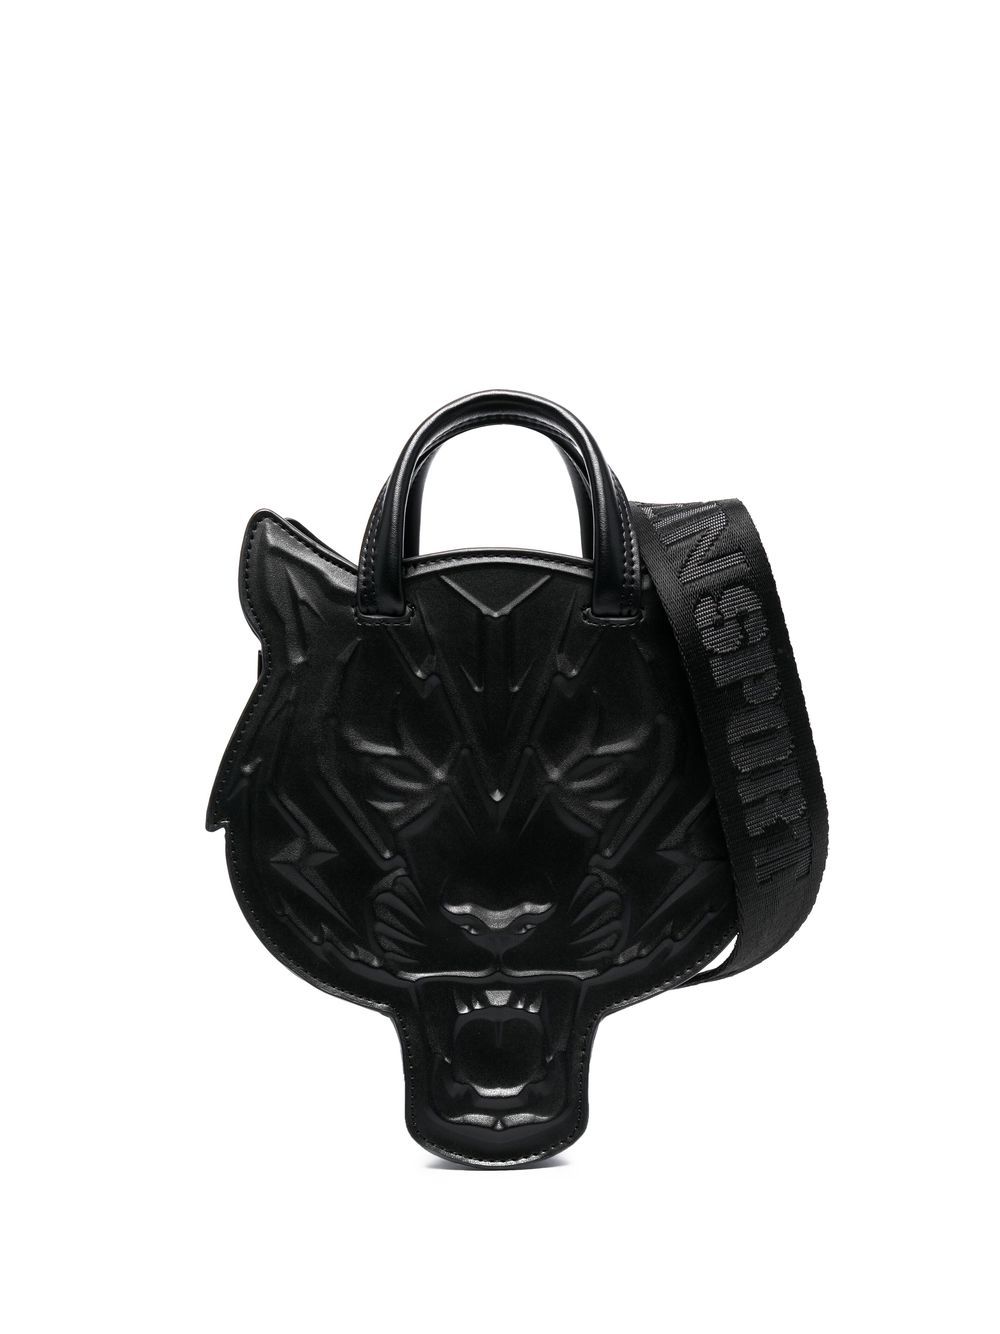 tiger-head leather tote bag